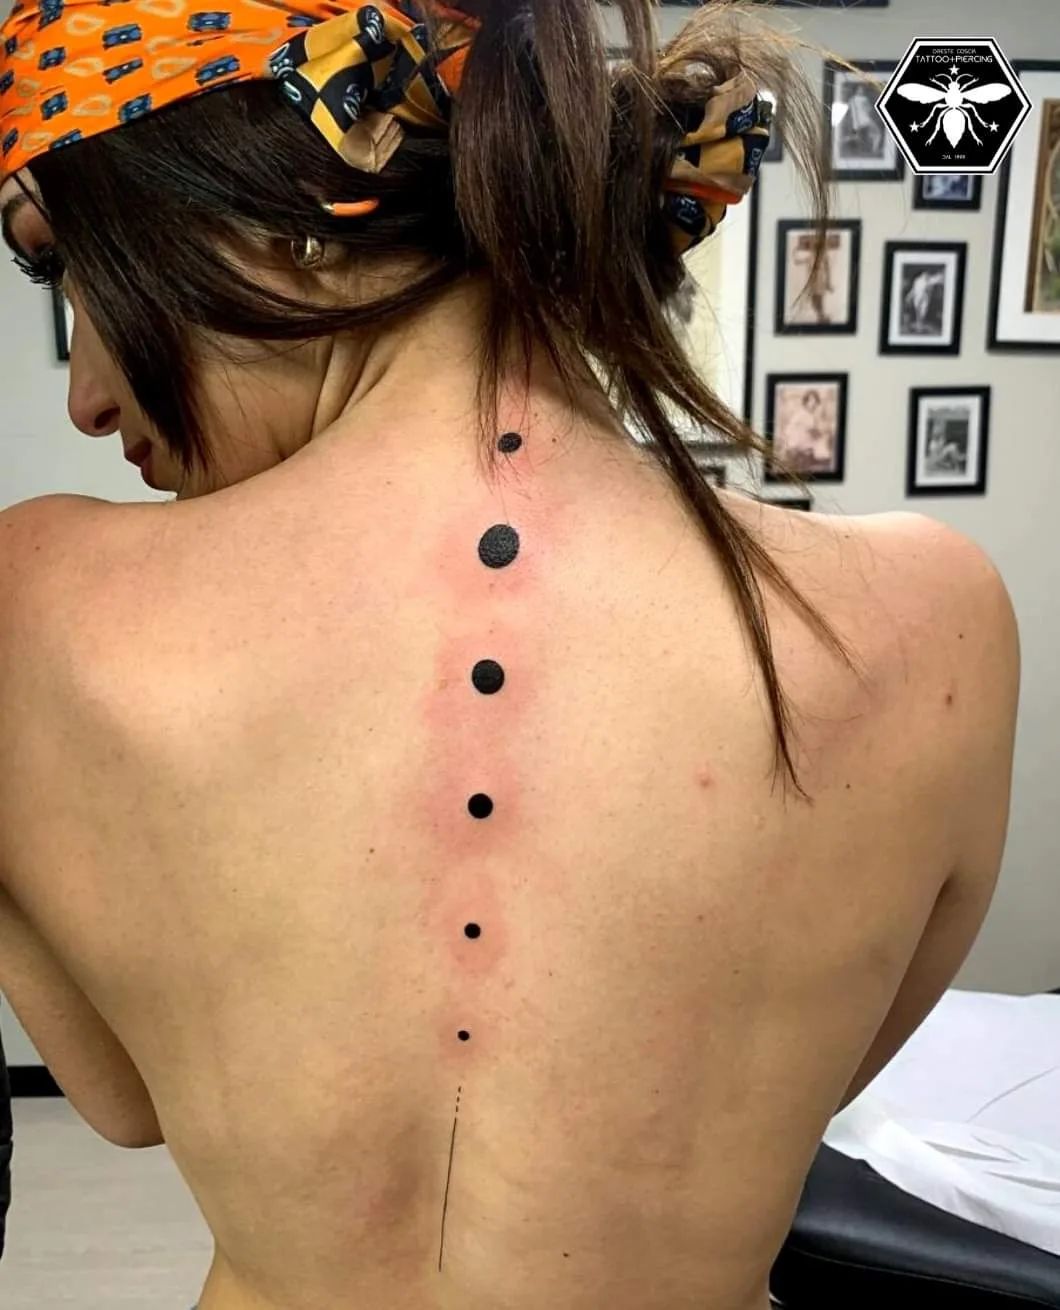 Show all the phases of the moon with this cool back black ink tattoo.